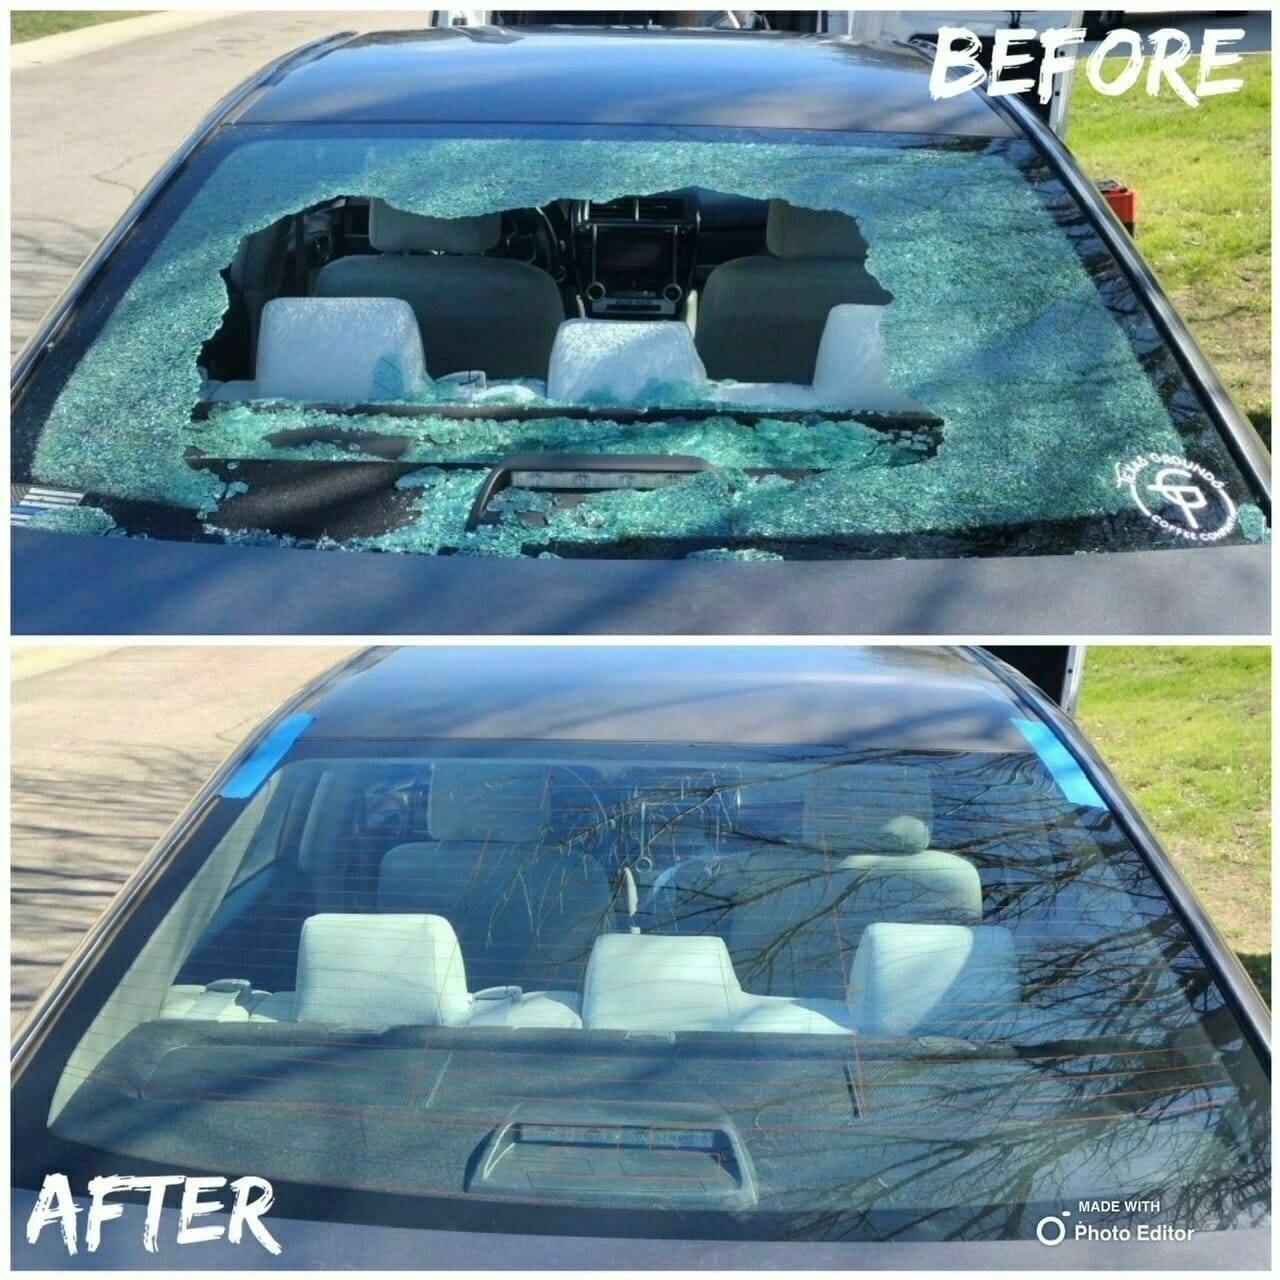 This before and after image demonstrates the successful repair of a sedan's rear windshield in South San Antonio, Texas. The top half features the damaged glass, smashed due to a break-in. The bottom half showcases the sedan after the repair, fitted with a new, clear, and intact back glass, highlighting the quality and effectiveness of our windshield replacement service.